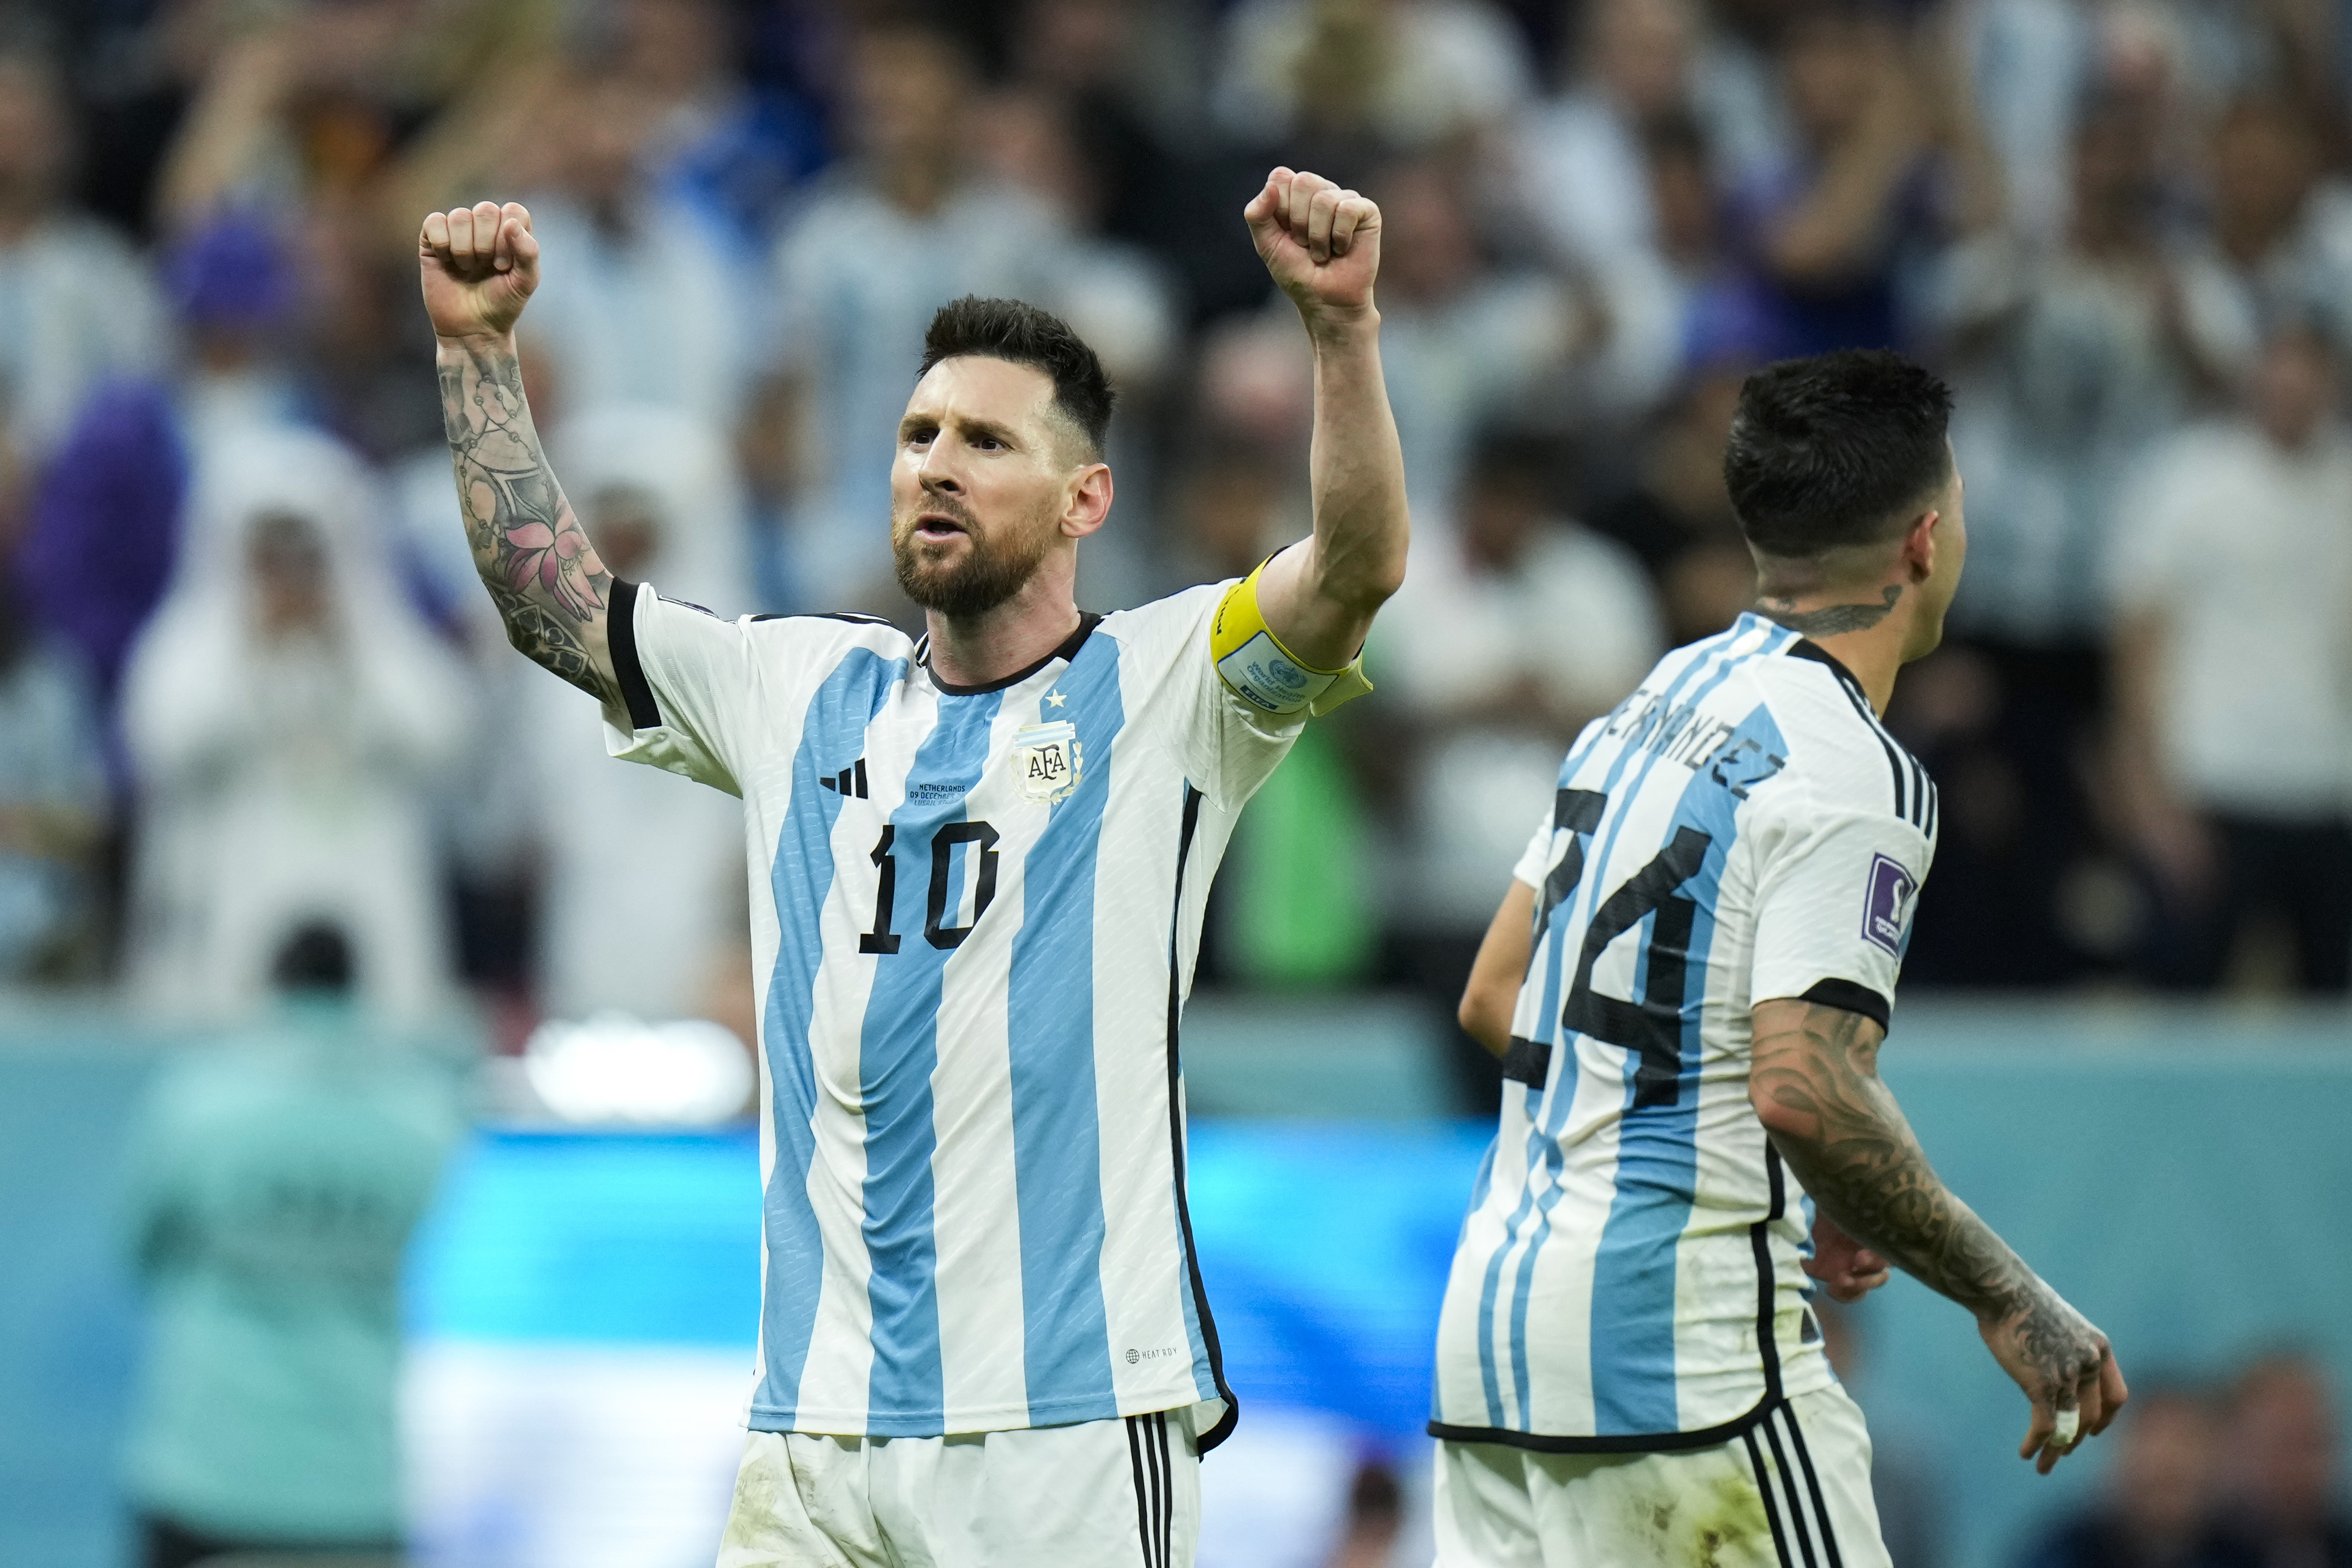 Fifa World Cup 2022 semifinal Argentina v Croatia - start time, odds, teams, how to watch, live streaming